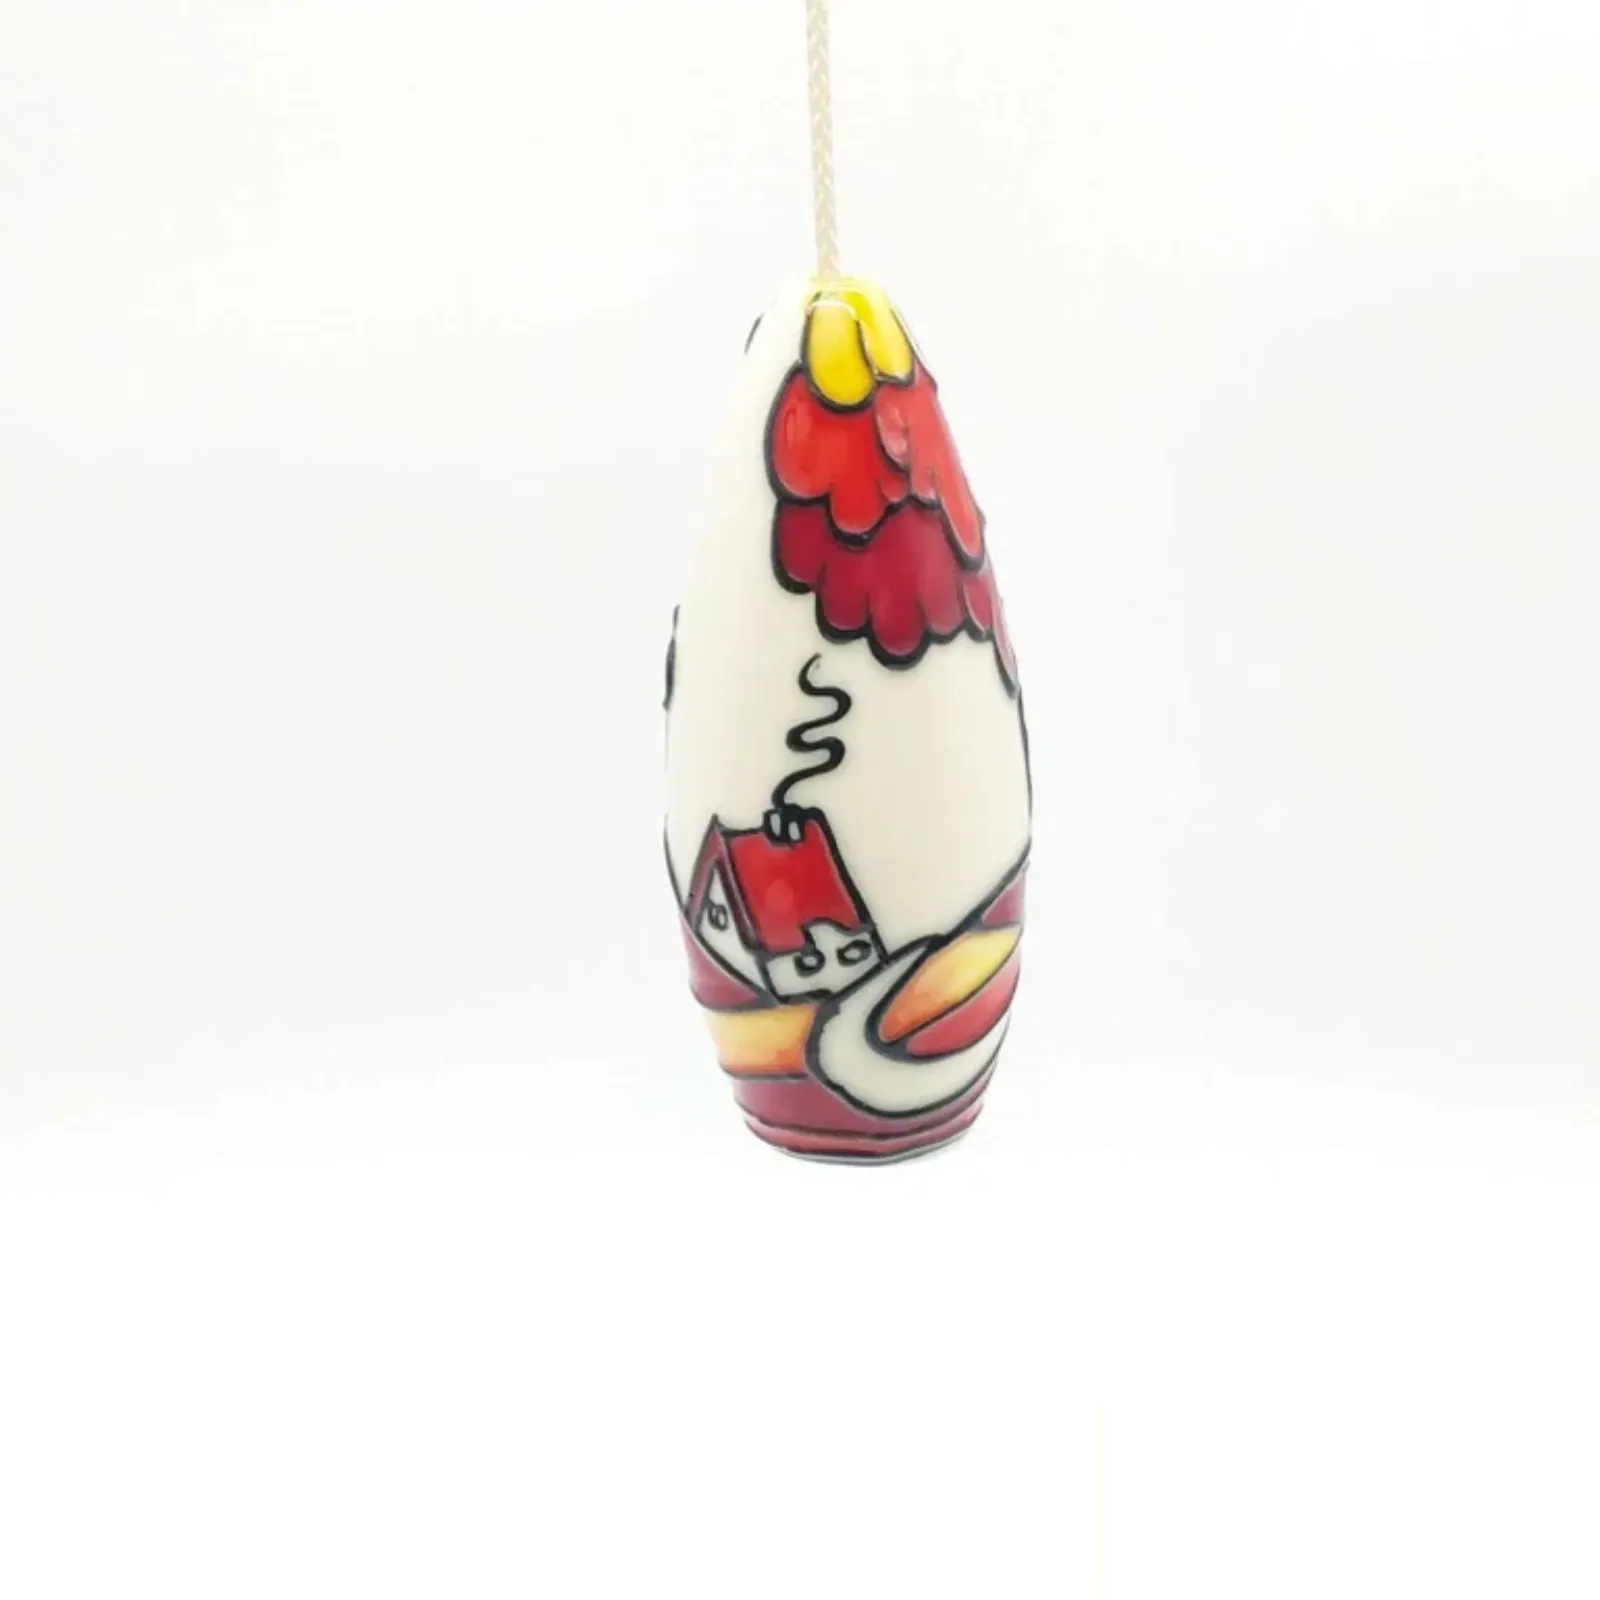 rustic ceramic light pull white and red colours artist design